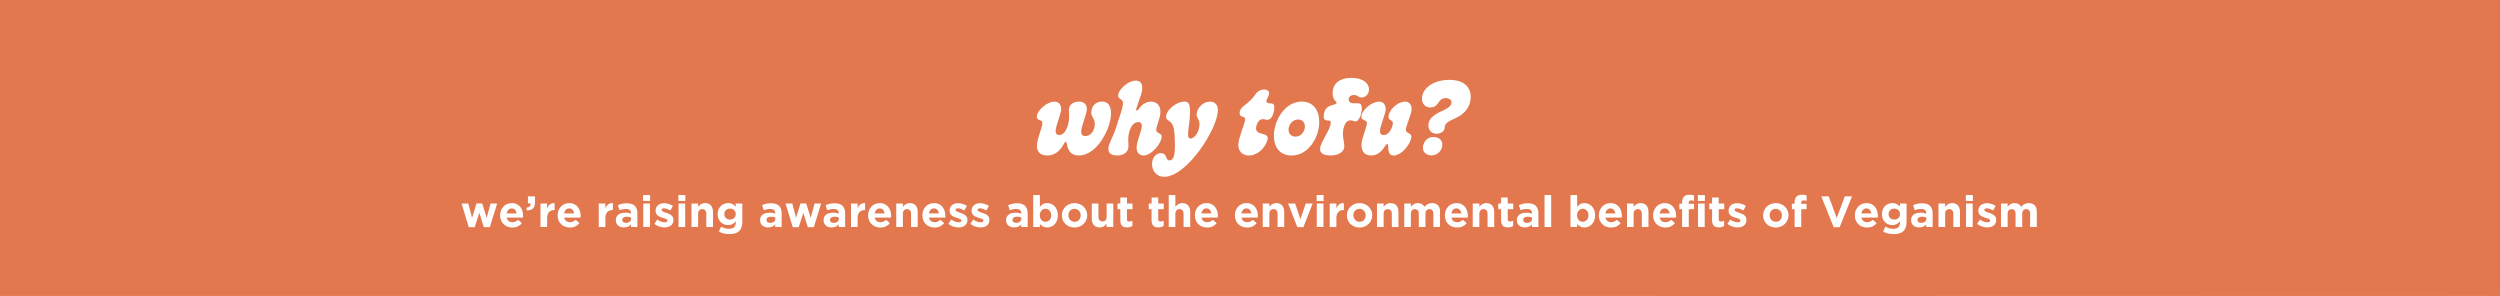 why tofu? to raise awareness about the environmental benefits of veganism.